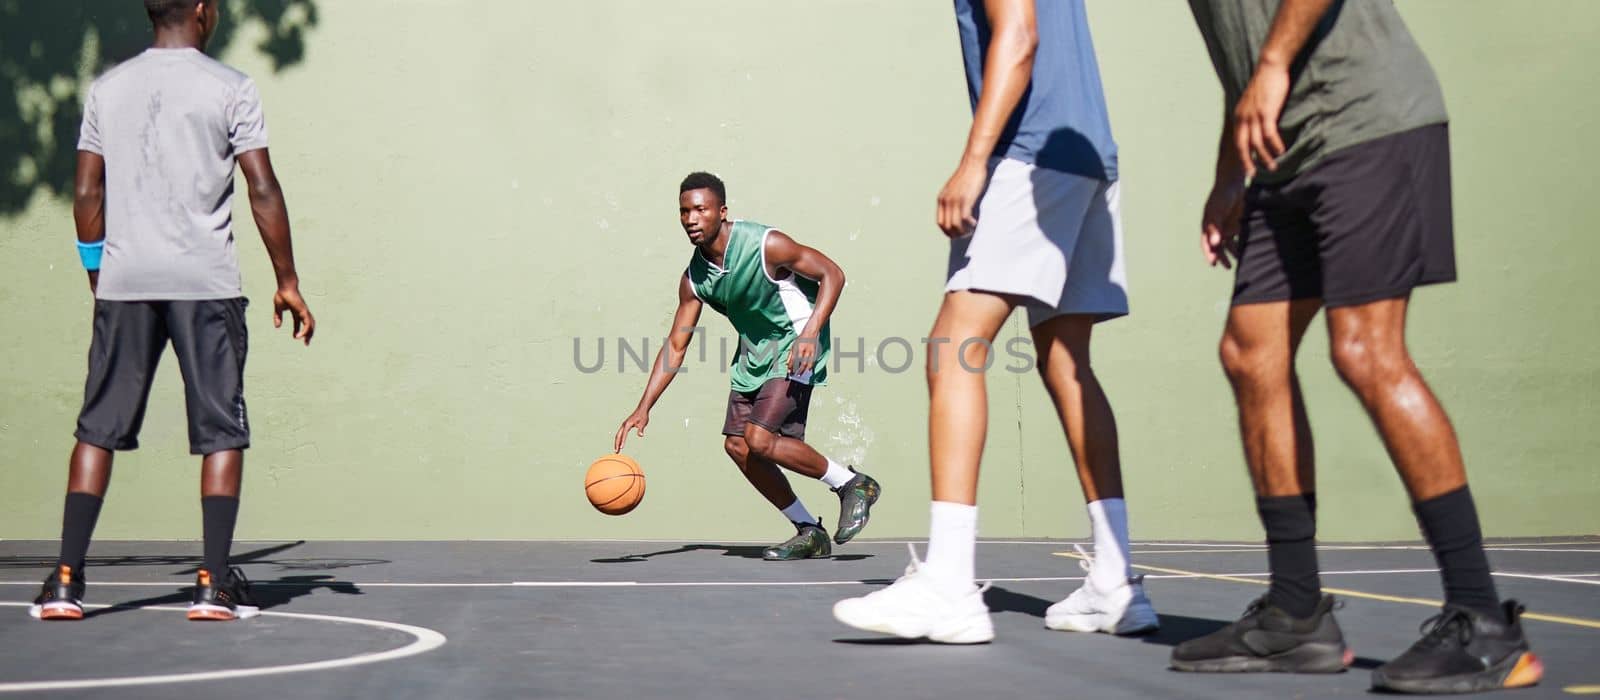 Sports, training and teamwork with man on basketball court for fitness, workout and exercise. Cardio, summer and friends with basketball player for energy, stamina and endurance in competition games.